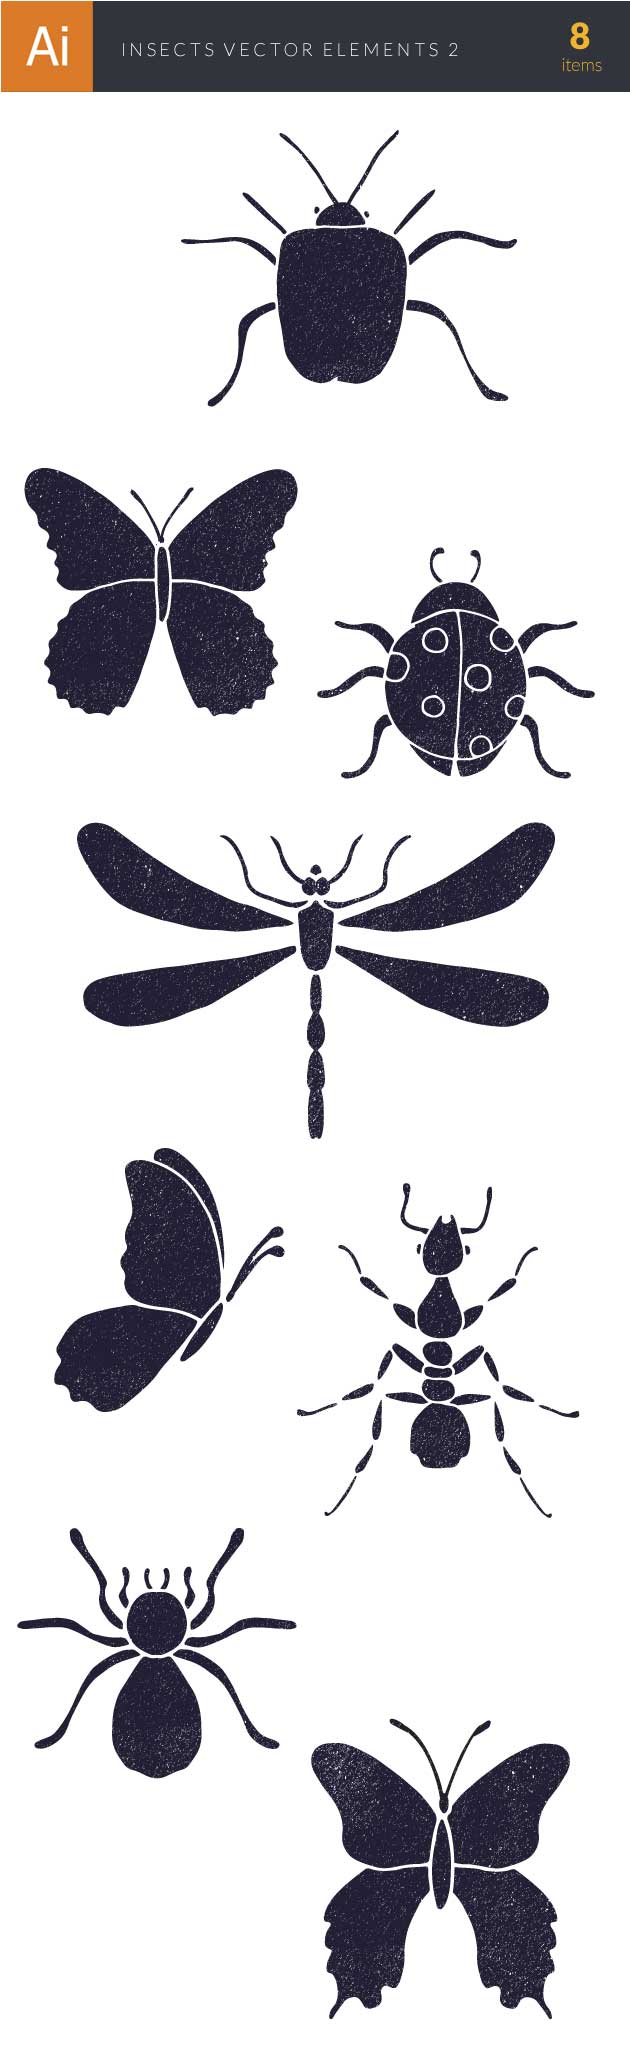 Insects Vector Elements Set 2 29